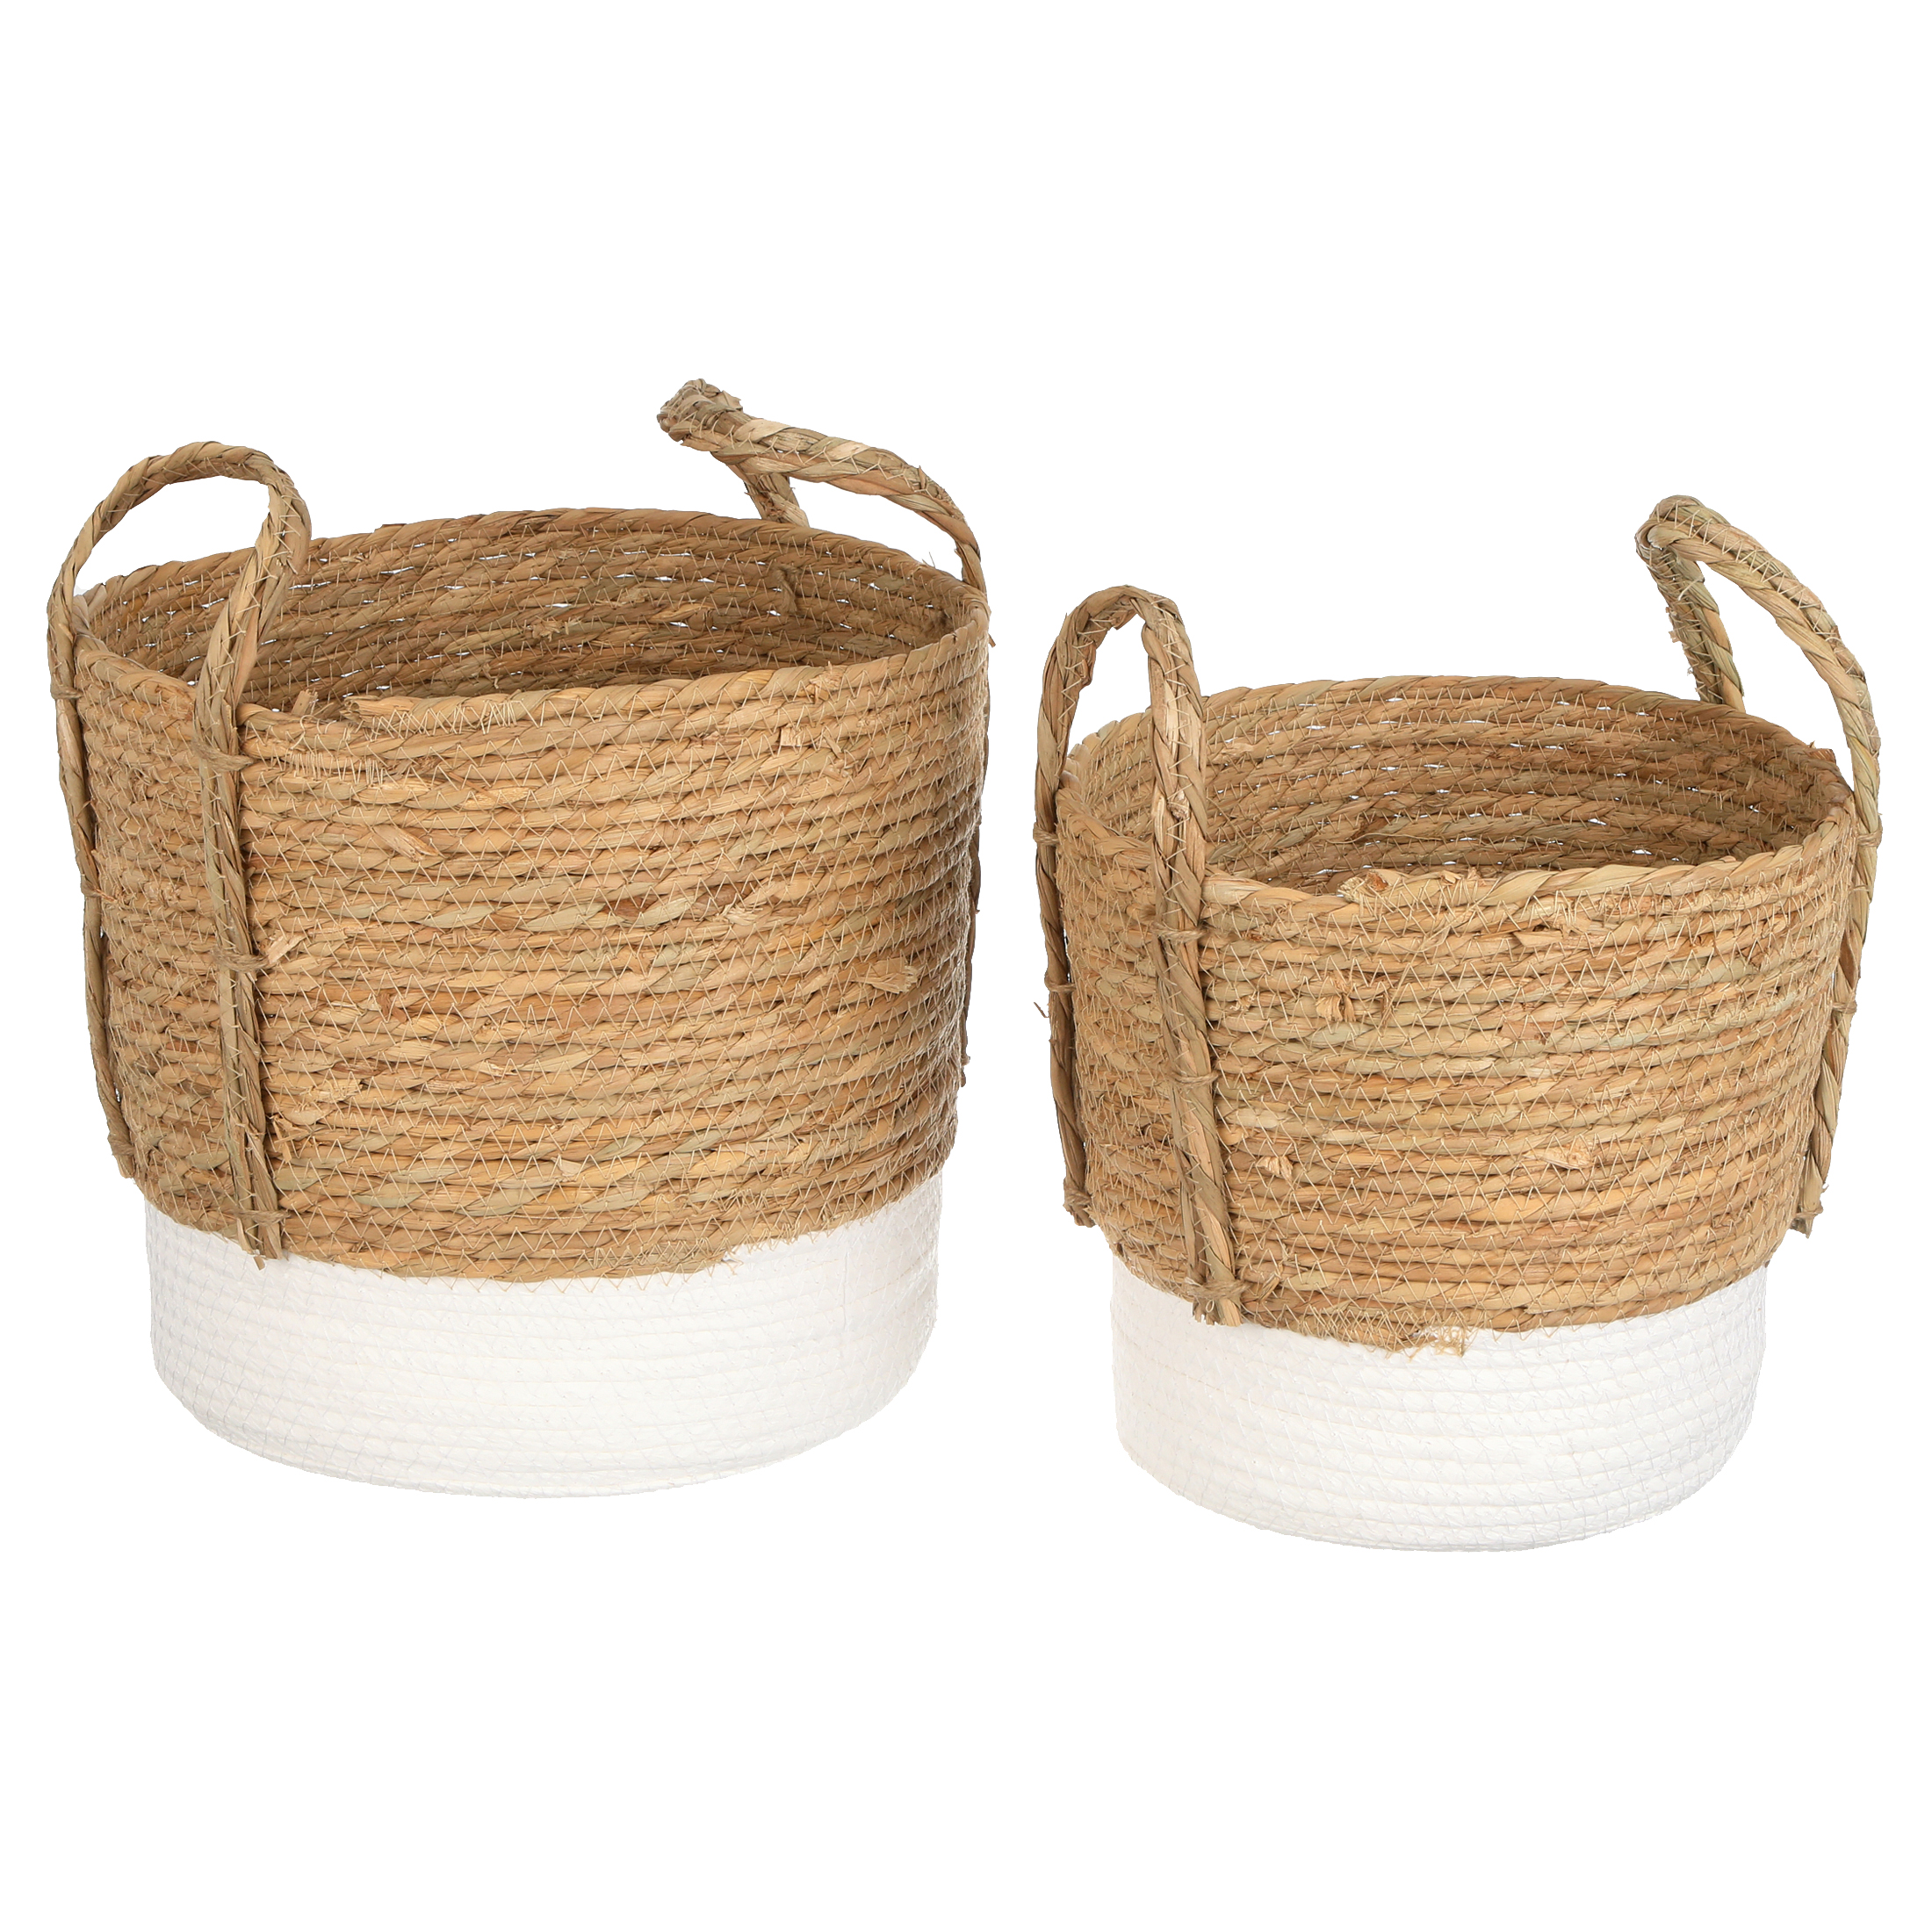 Mainstays Seagrass & Paper Rope Baskets, Set of 2, Small and Medium, Storage - image 2 of 6